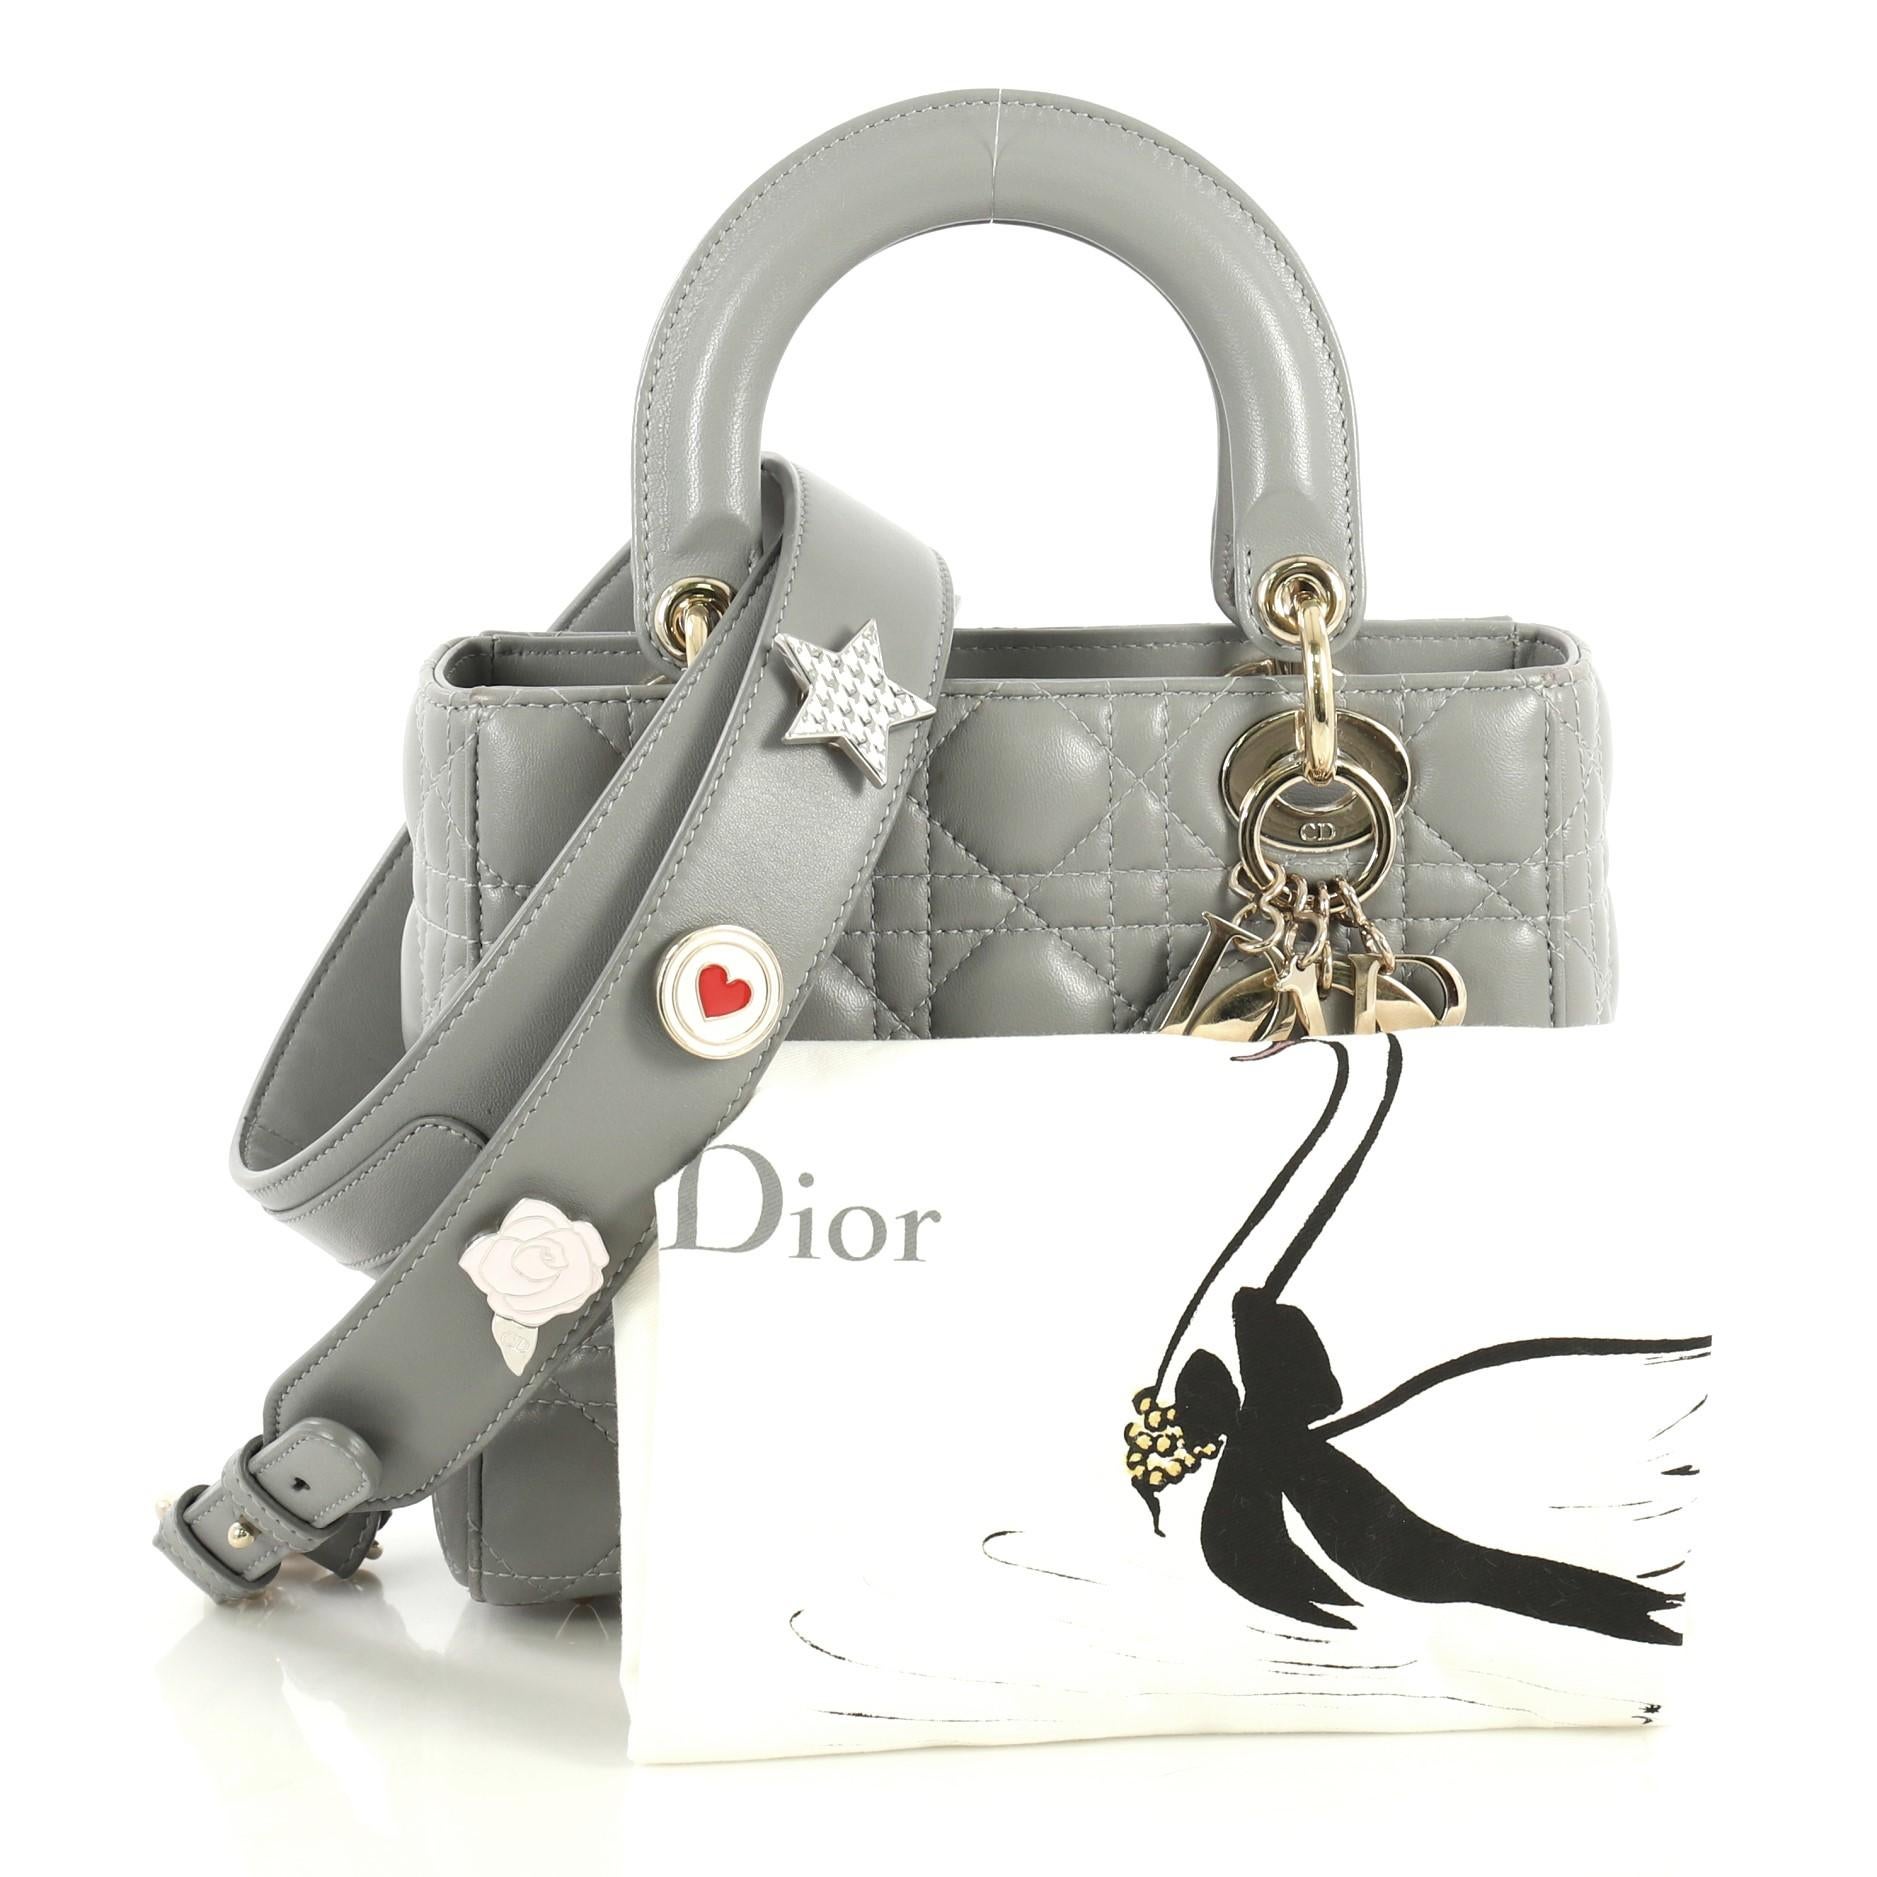 This Christian Dior My Lady Dior Bag Cannage Quilt Lambskin, crafted from gray cannage quilted lambskin, features short dual handles with Dior charms and gold-tone hardware. It opens to a neutral fabric interior with zip pocket. 

Estimated Retail